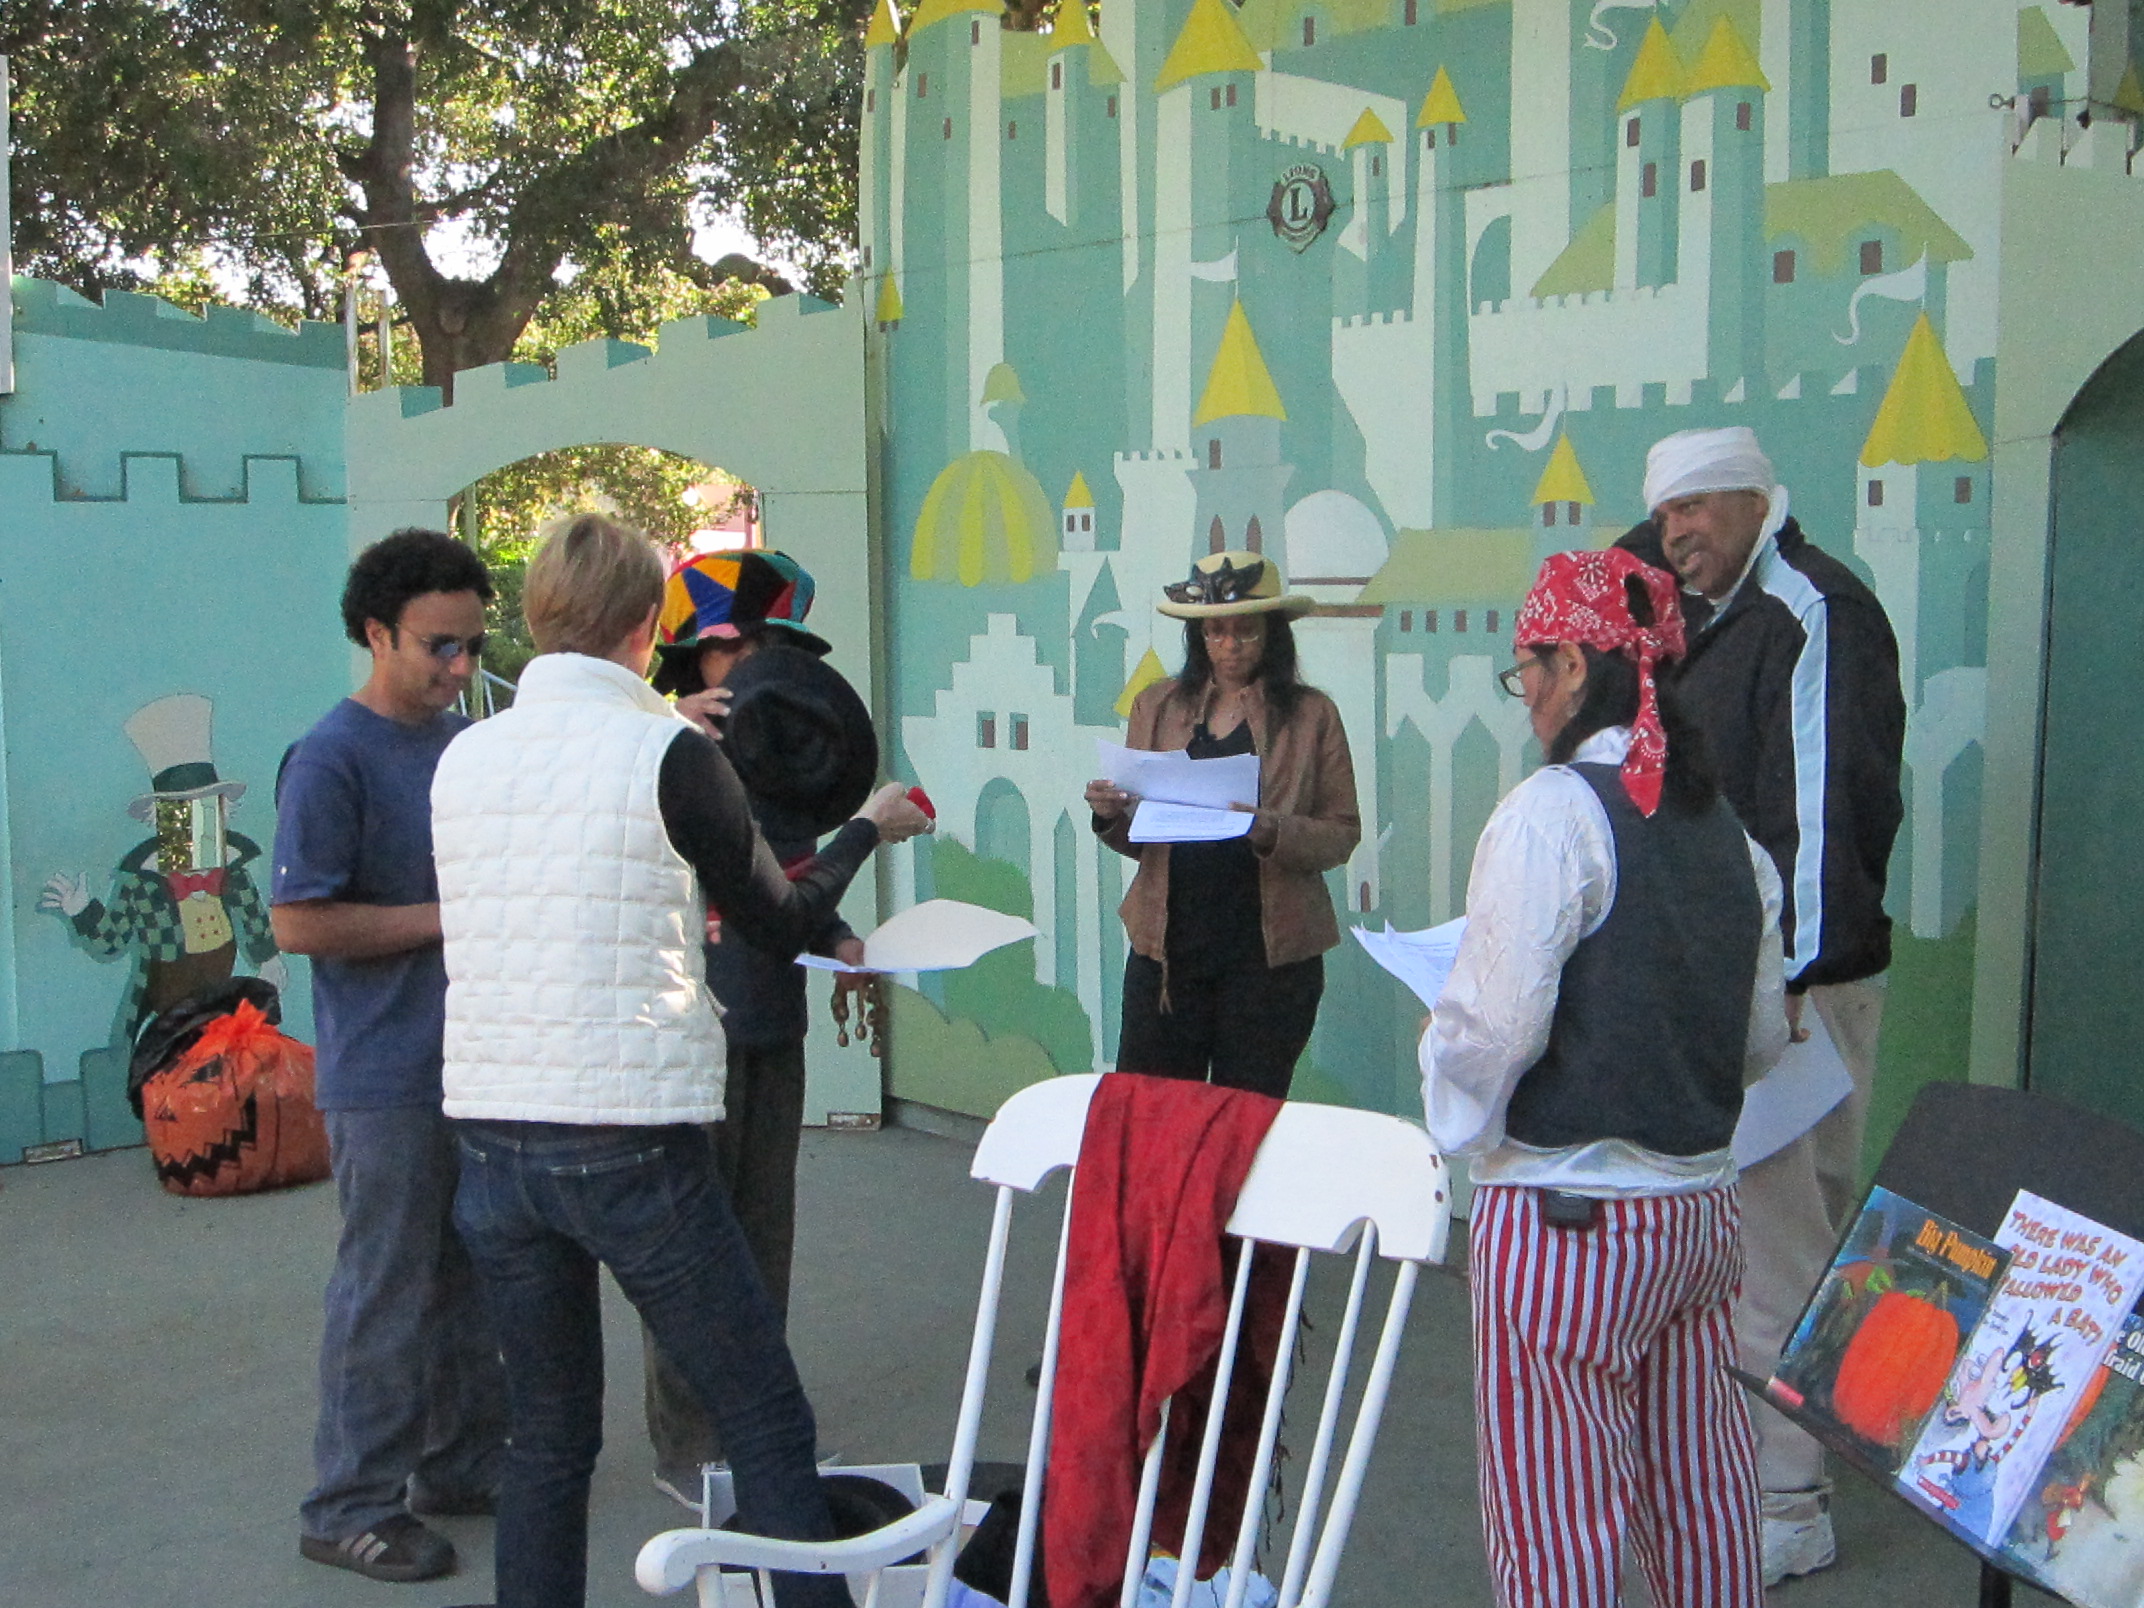 Veronica Loud (center) rehearsing for a performance with the SAG BookPALS group at Children's Fairyland in Oakland, CA.